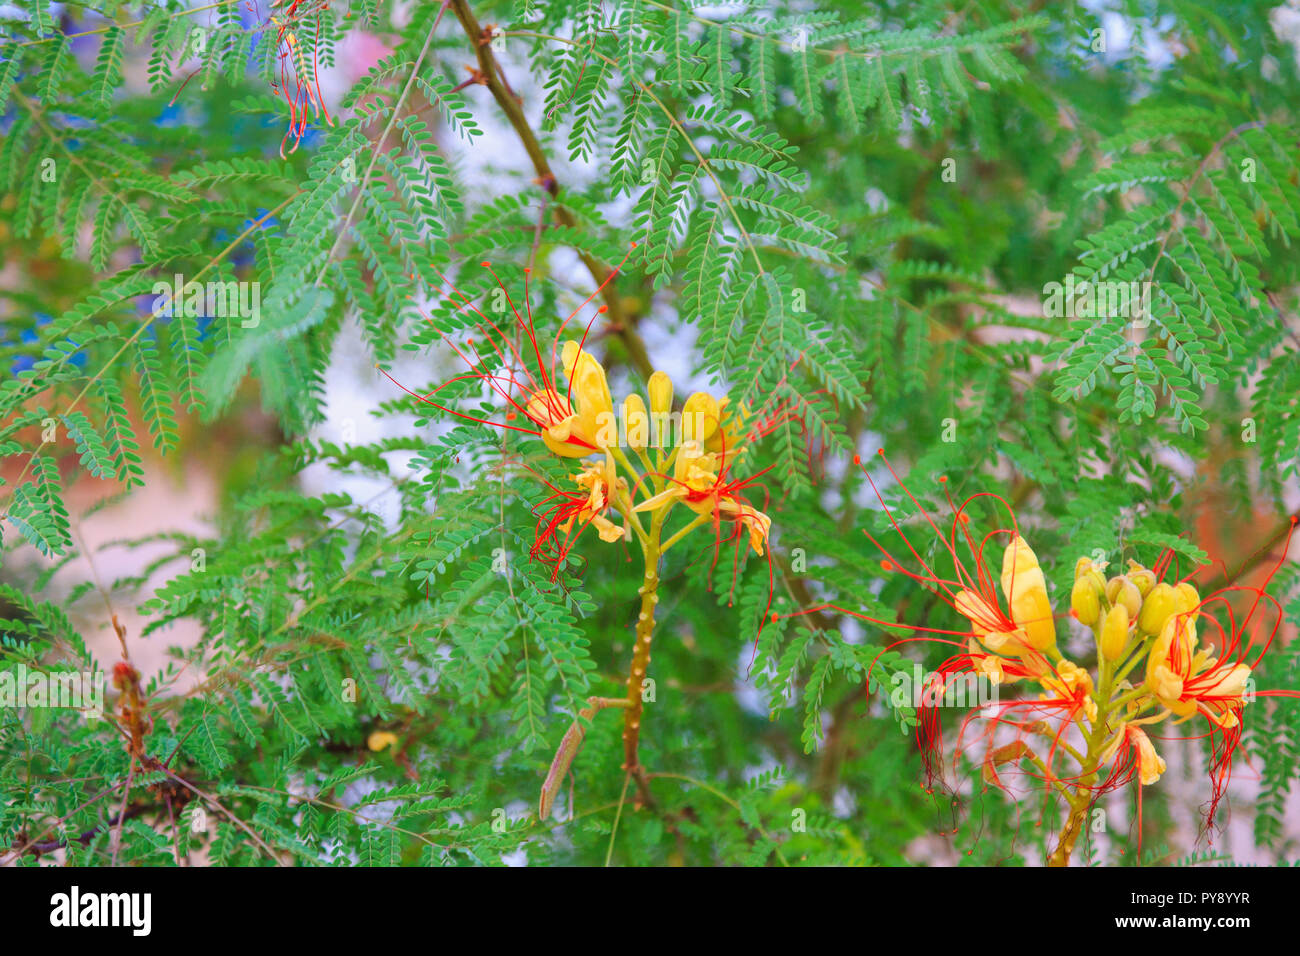 bird of paradise shrub or Erythrostemon gilliesii. Bright yellow red flowers on the green tree. Floral background Stock Photo